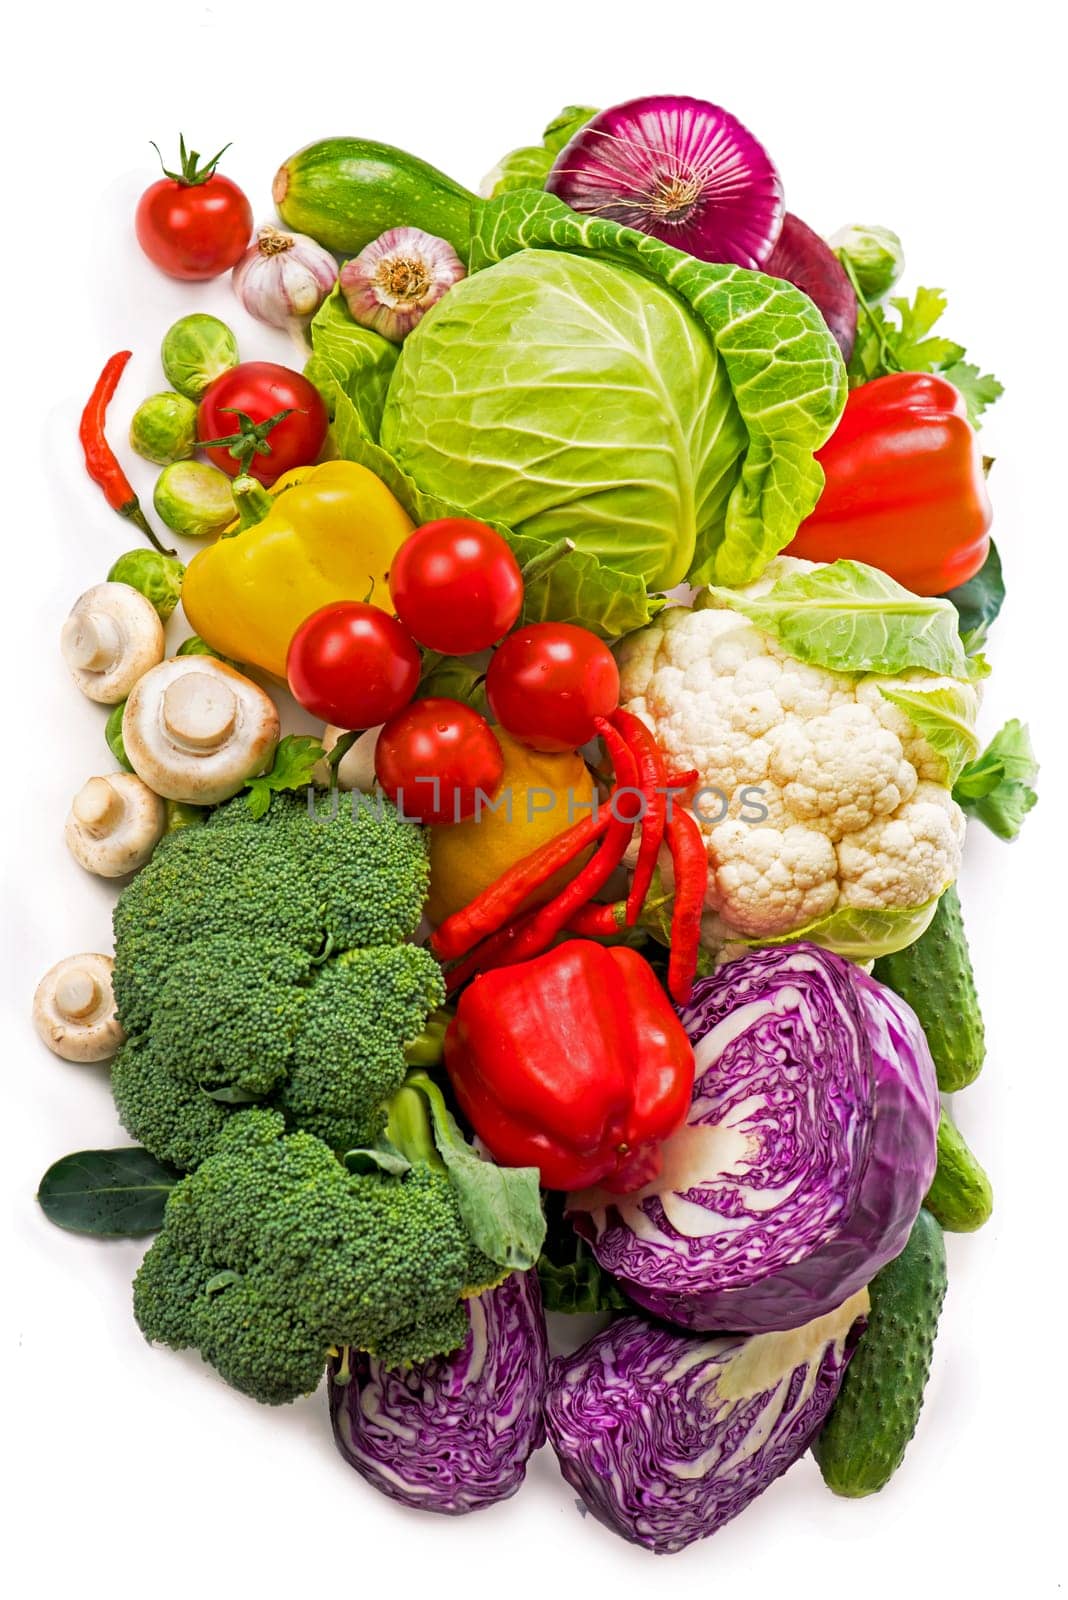 Collection of fresh vegetables. Vegetarian diet food. fresh vegetables isolated on white. Tomatoes, broccoli, peppers, mushrooms - products for the organic market by aprilphoto